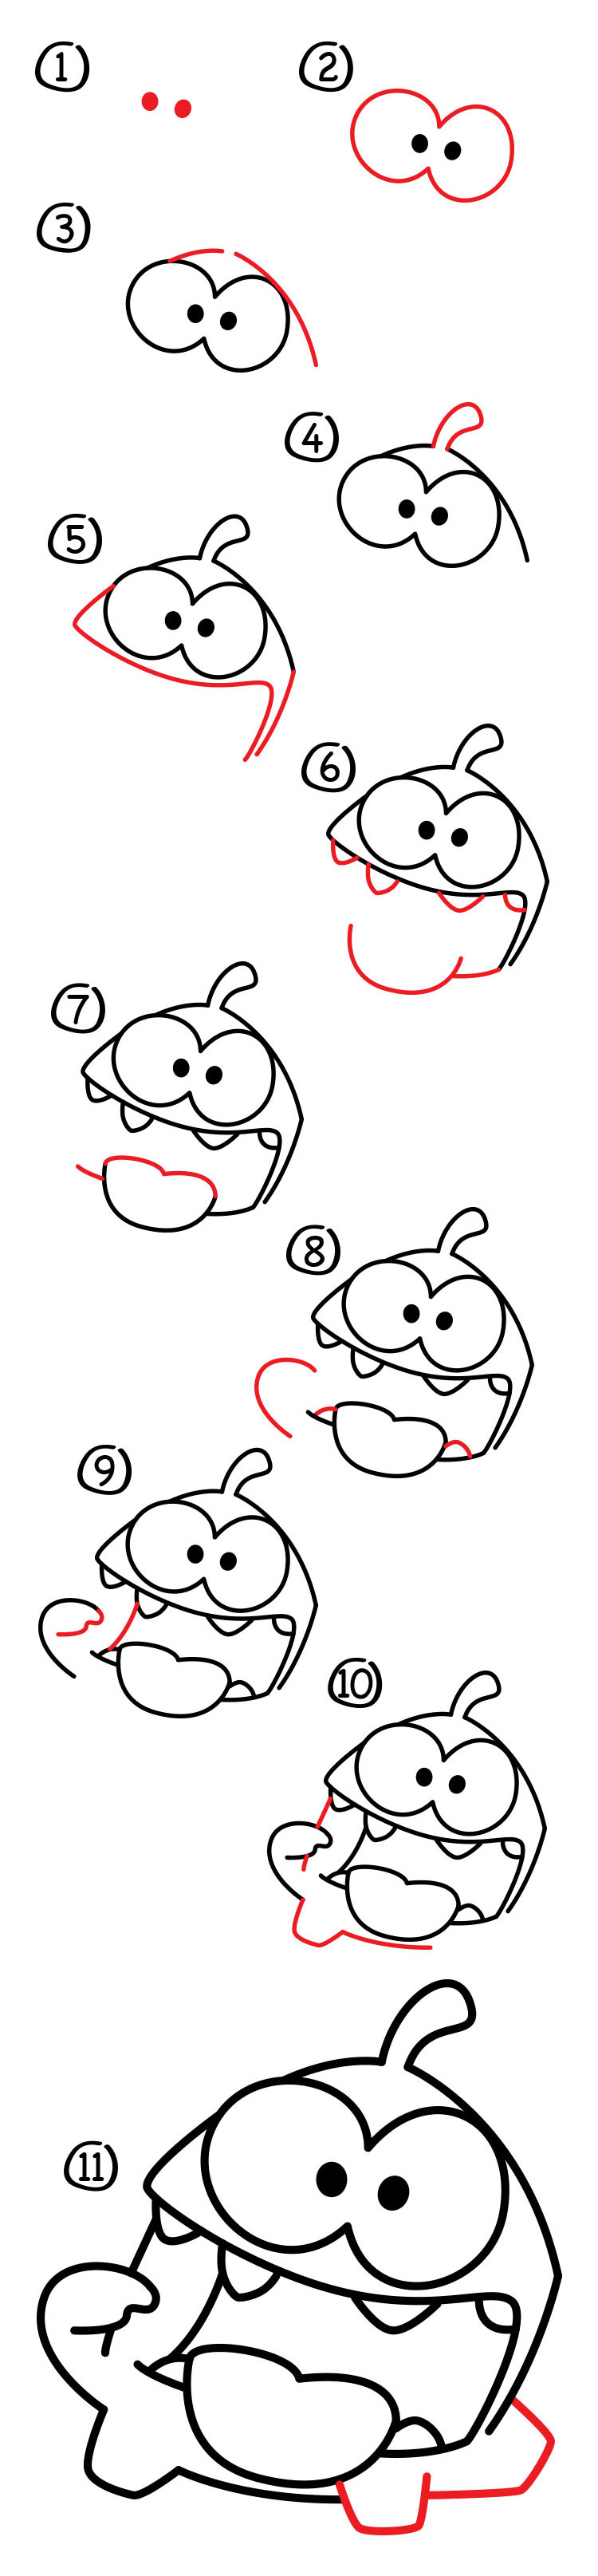 How To Draw Om Nom From Cut The Rope - Art for Kids Hub